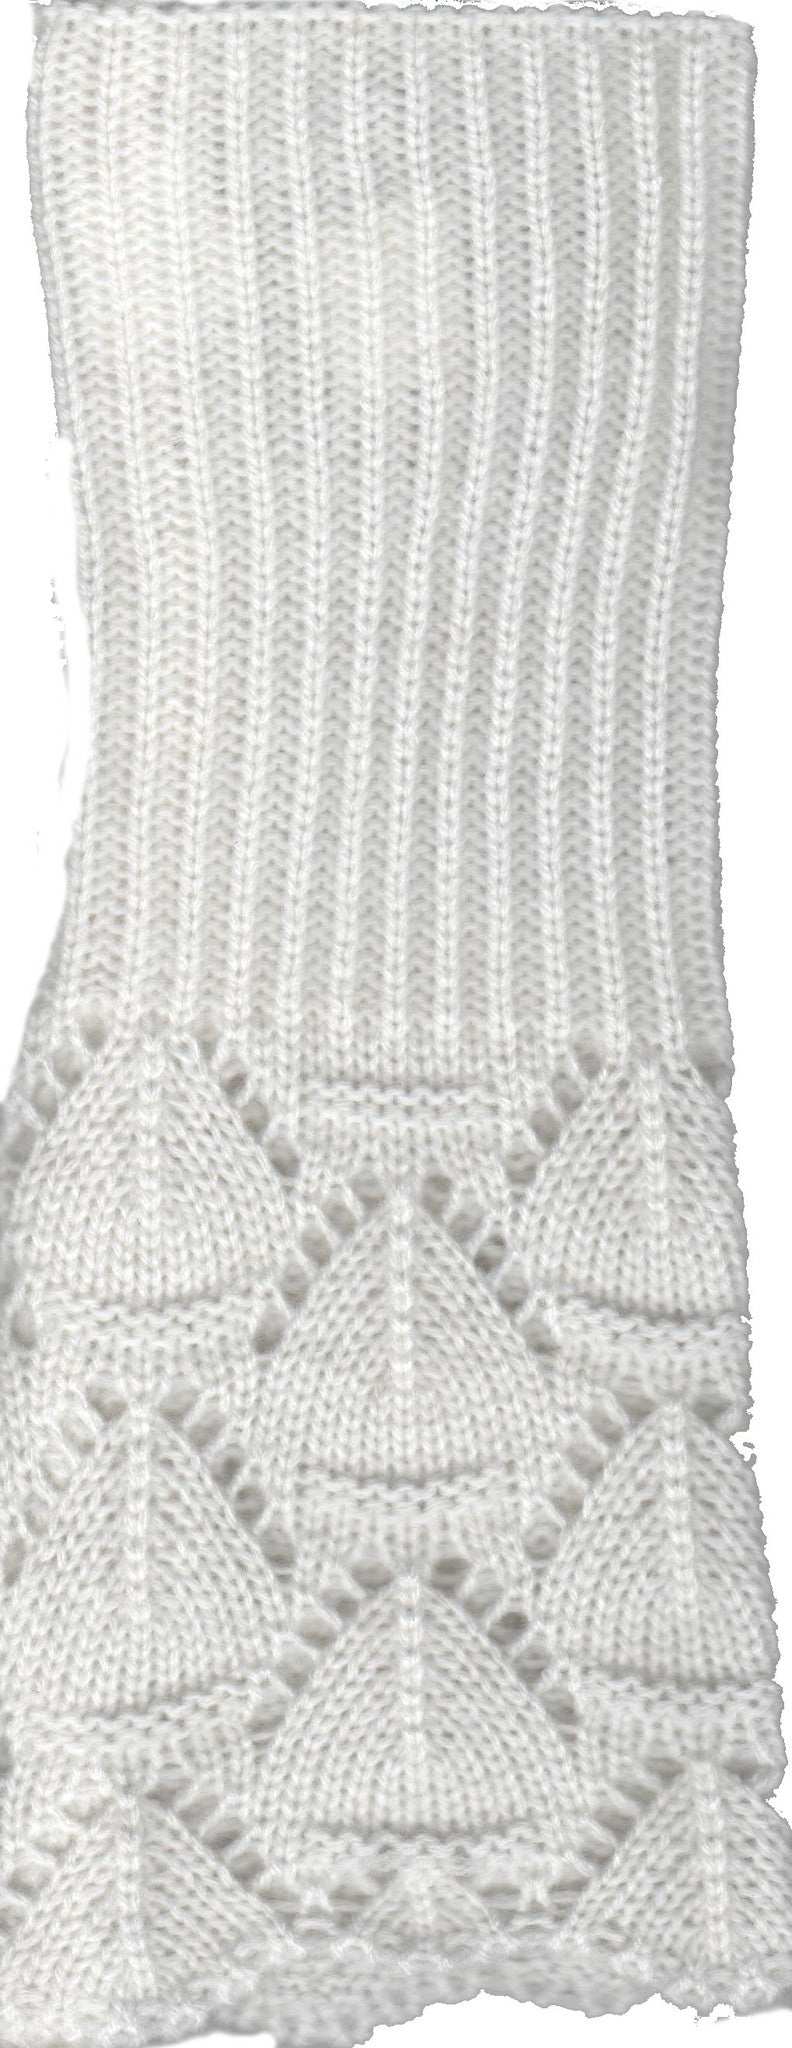 Scallop Edge Design with Lace weave by Lauer Gloves in Ivory 